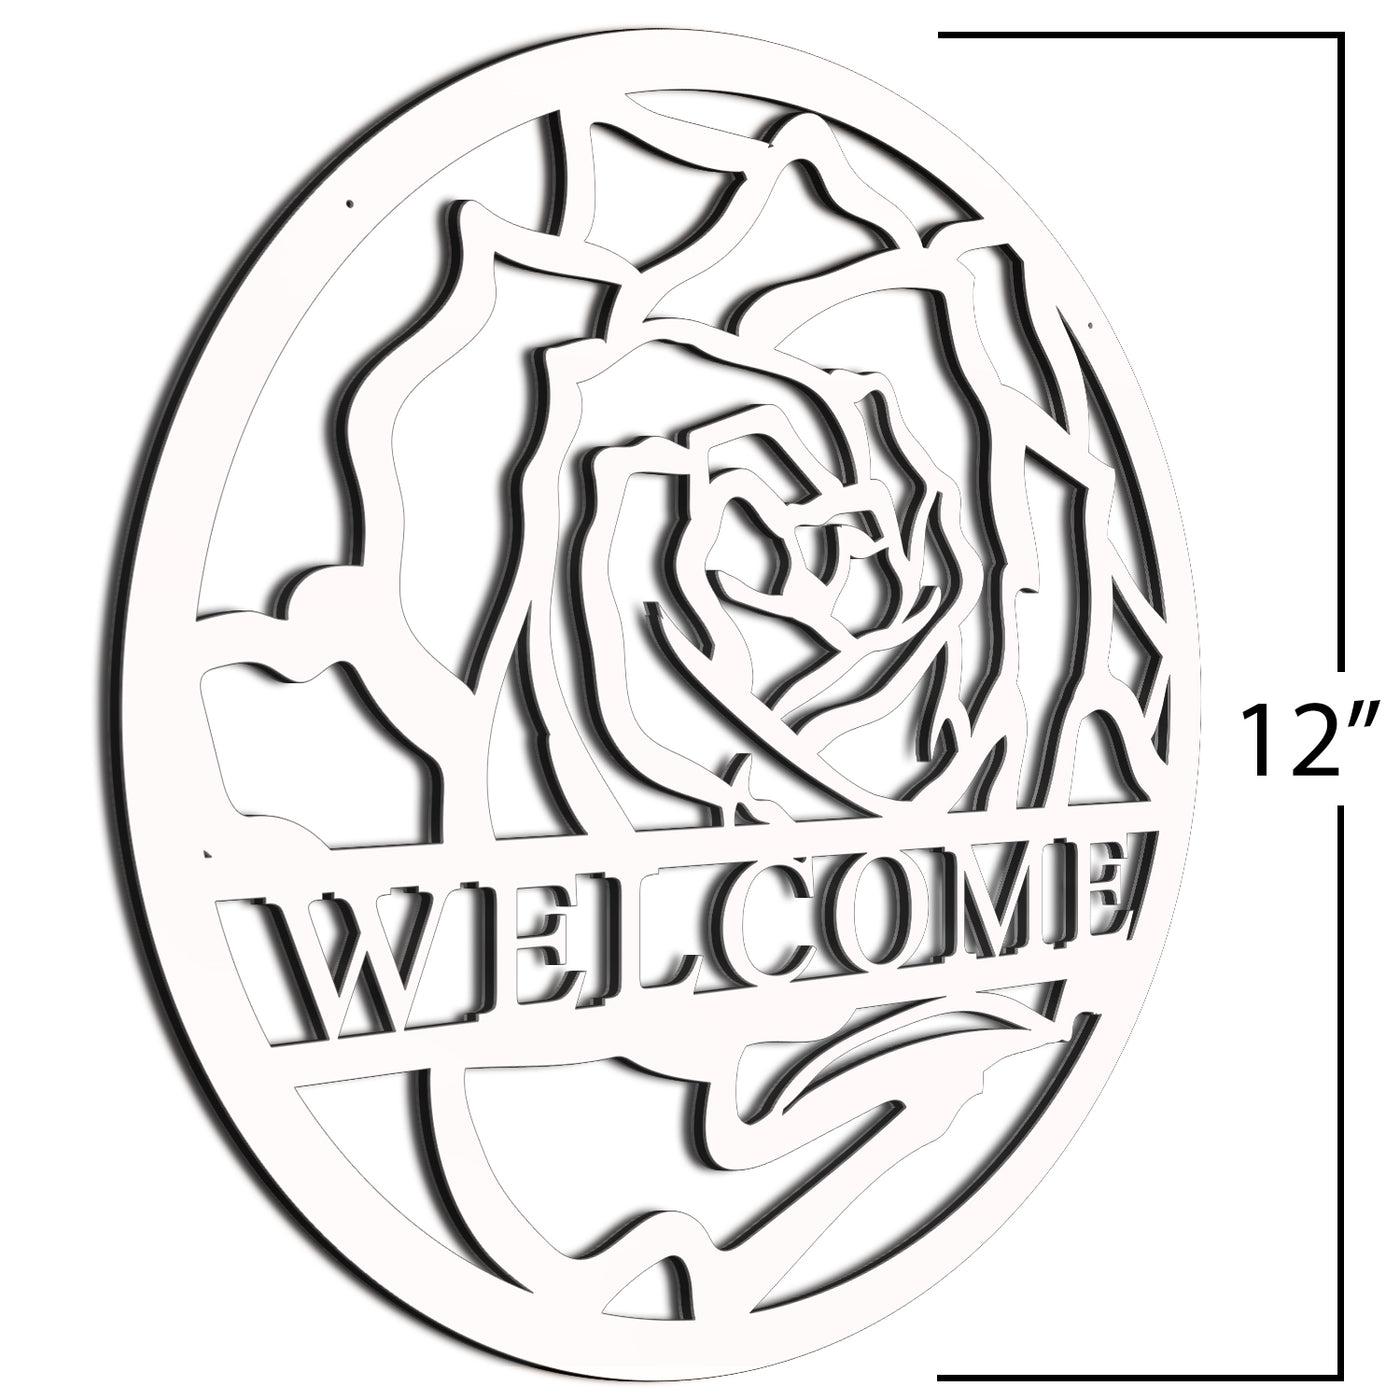 White Rose Weclome Sign 12 Inch